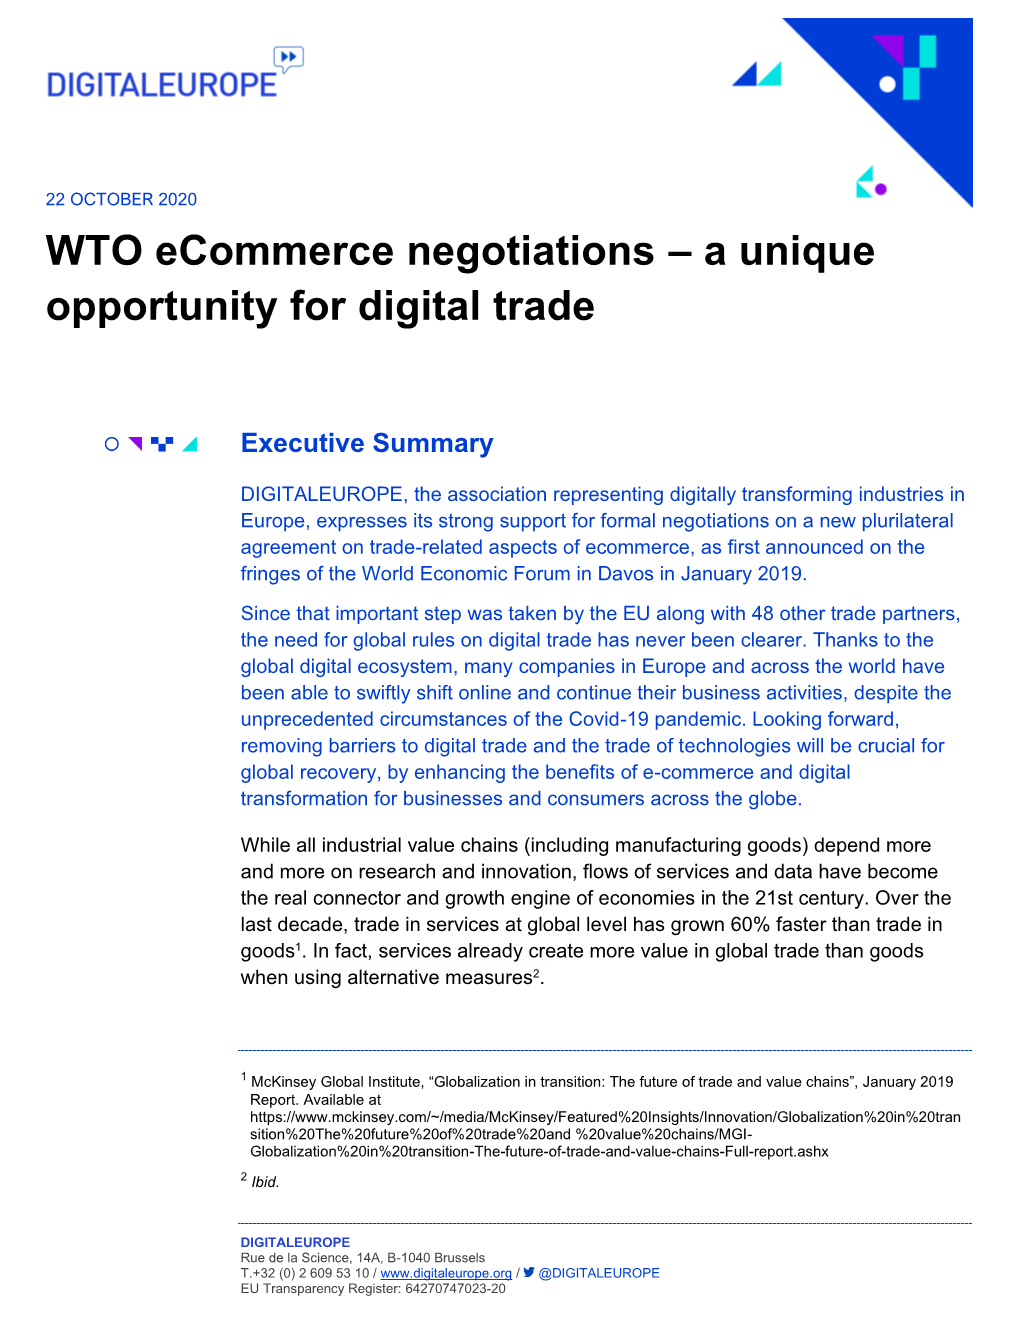 WTO Ecommerce Negotiations – a Unique Opportunity for Digital Trade